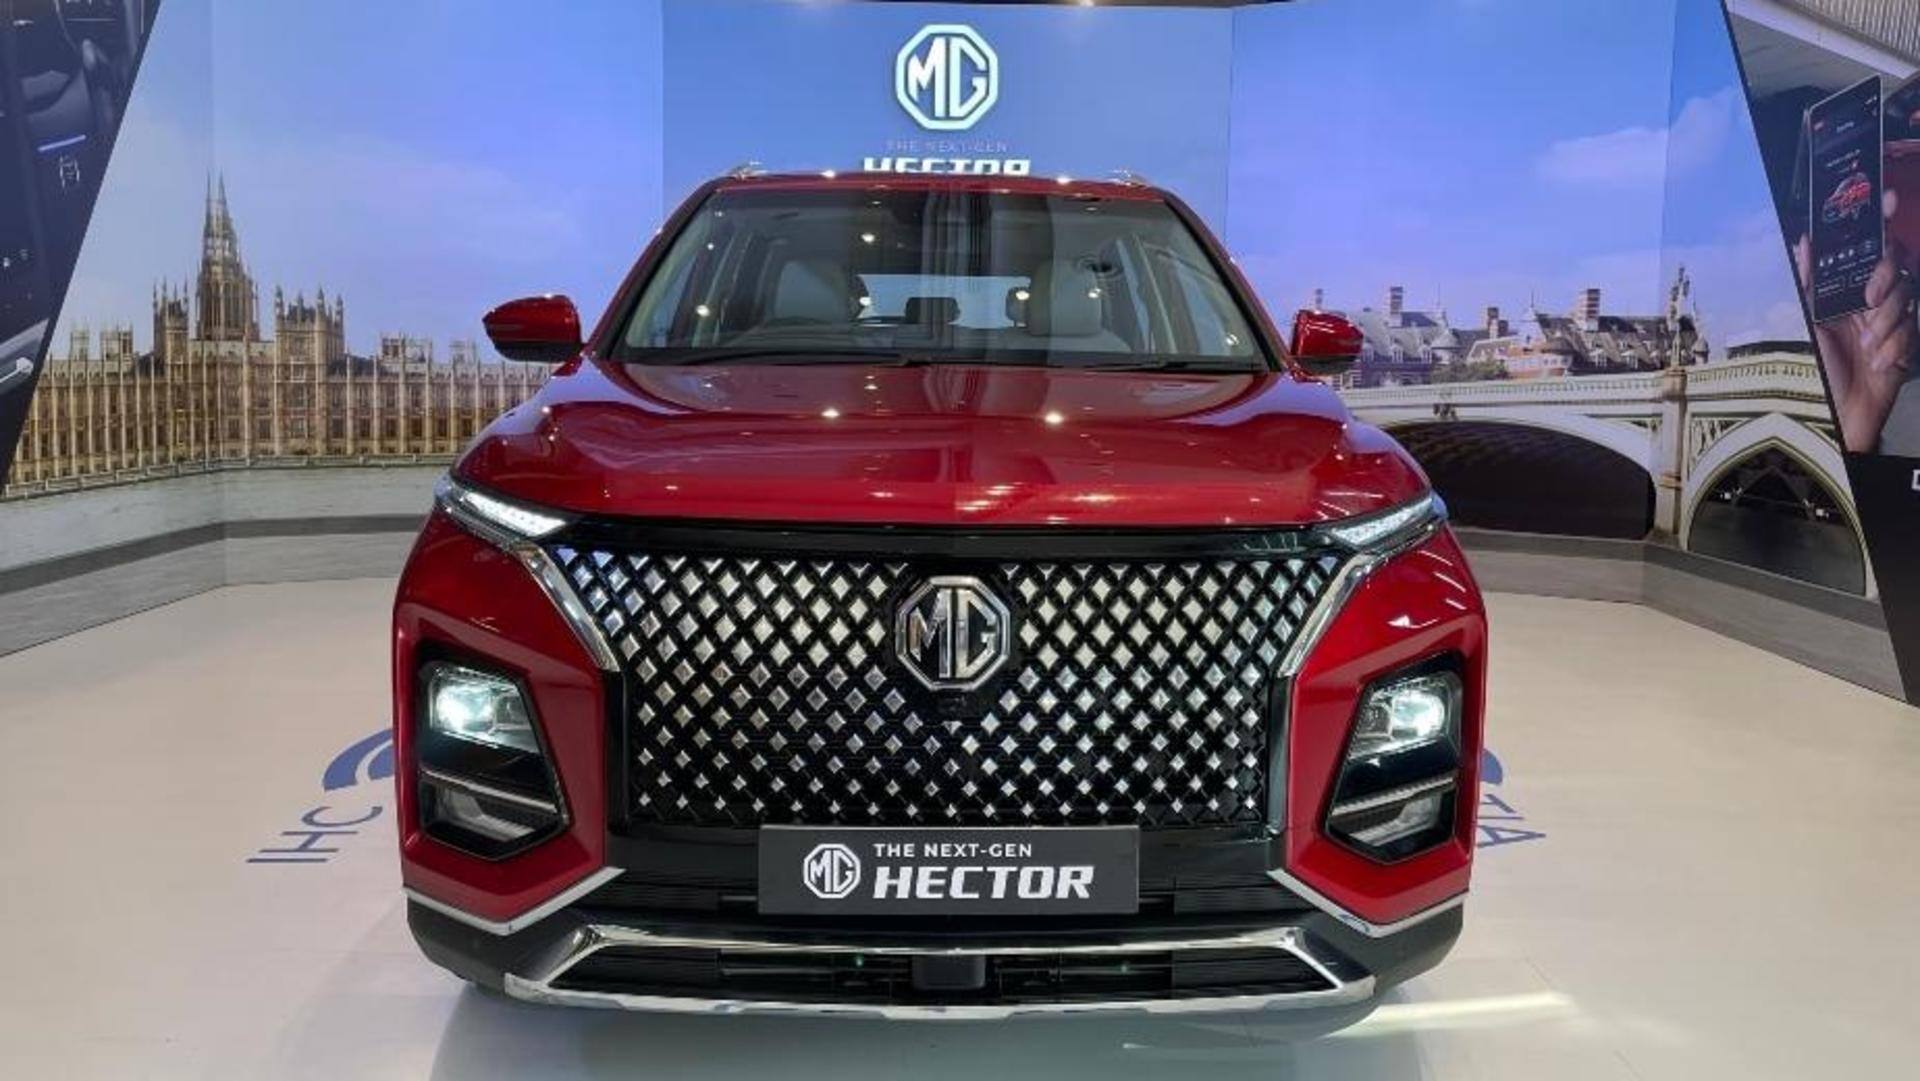 Auto Expo 2023: MG launches 2023 Hector, Hector Plus SUVs